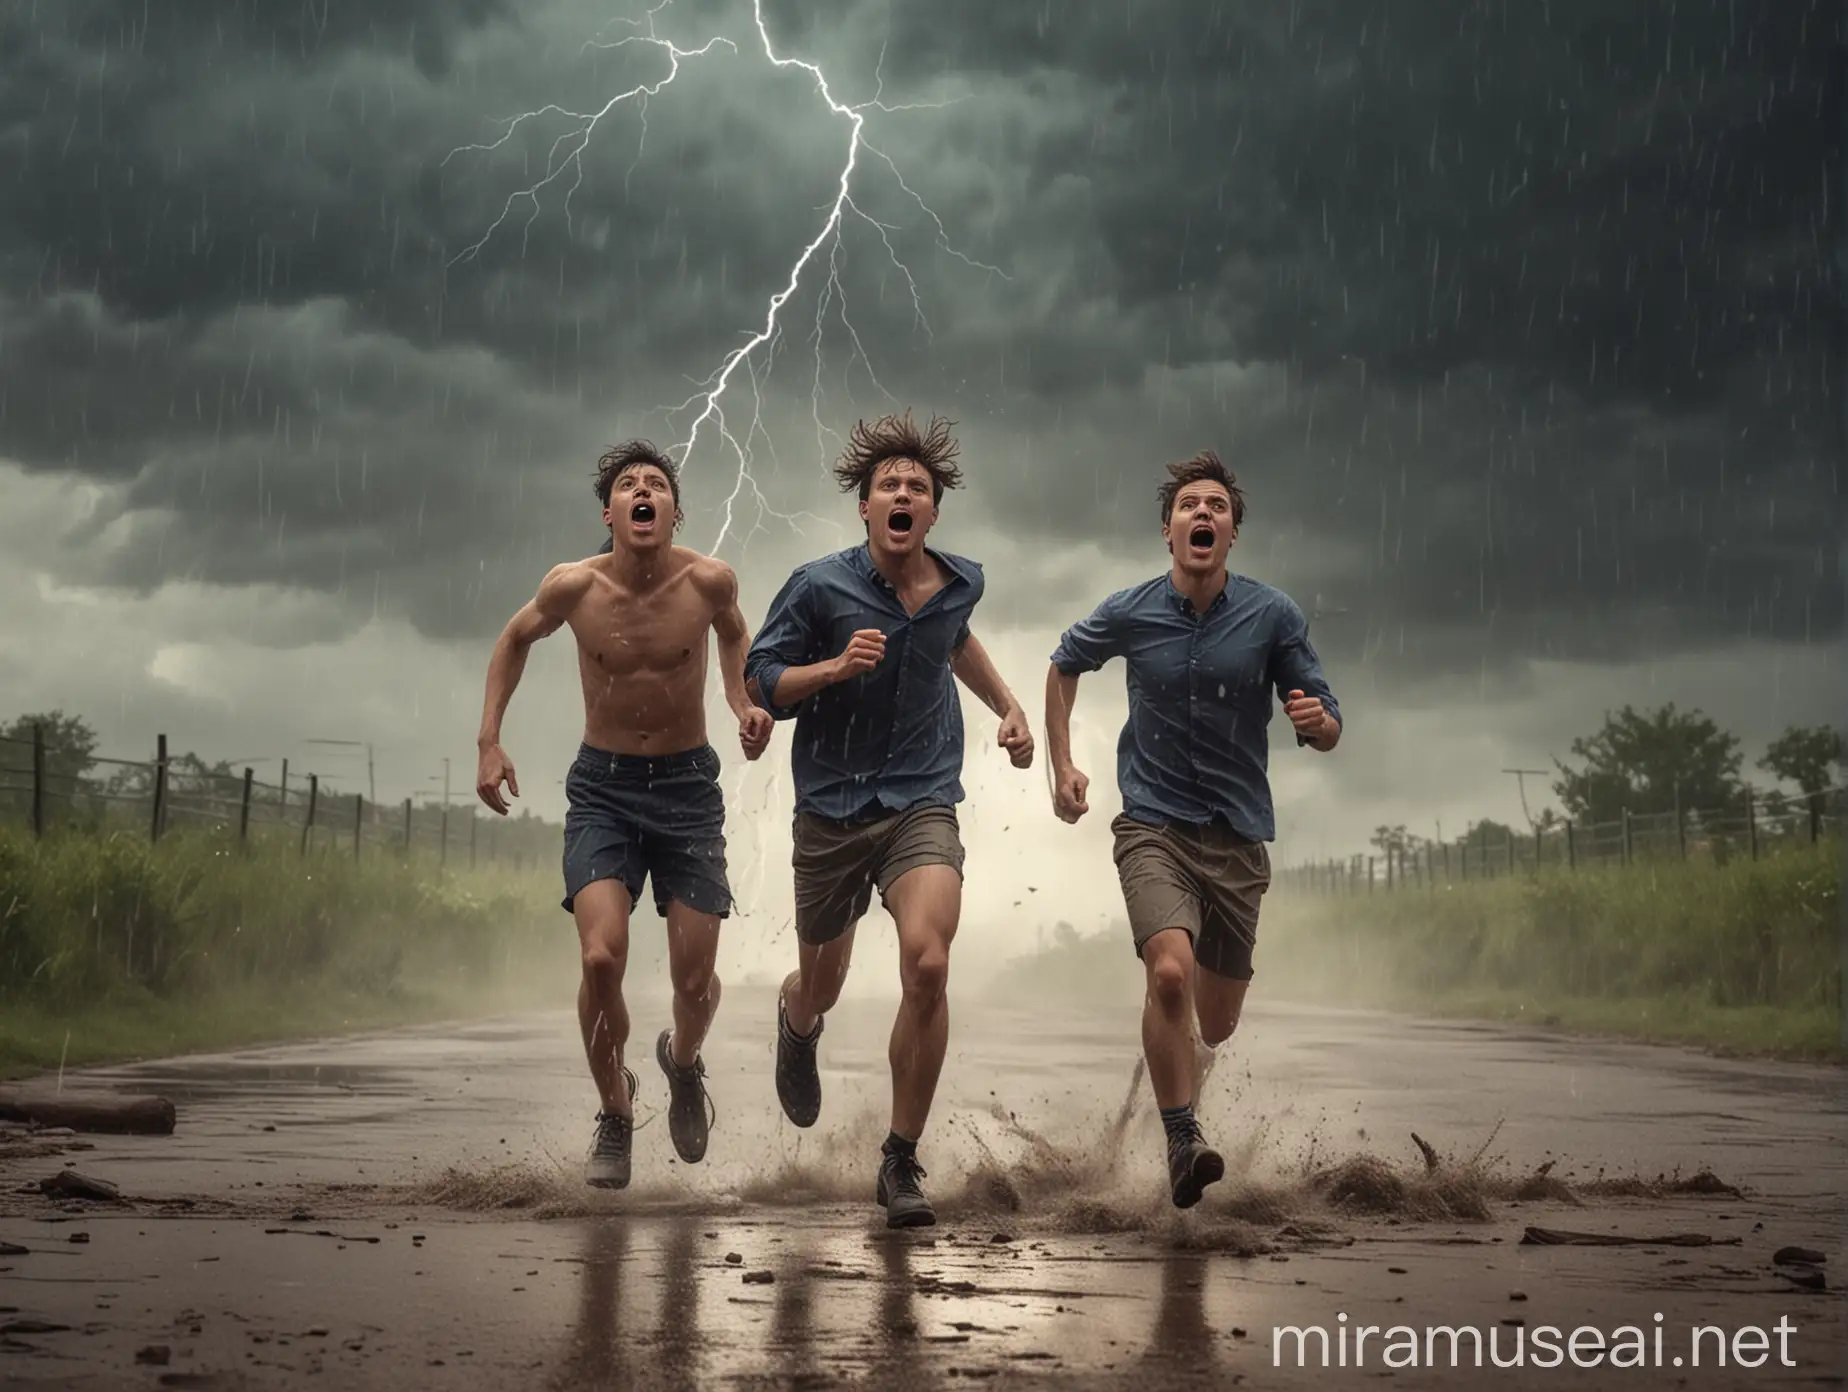 A young gay couple runs away from the storm and thunder in a panic